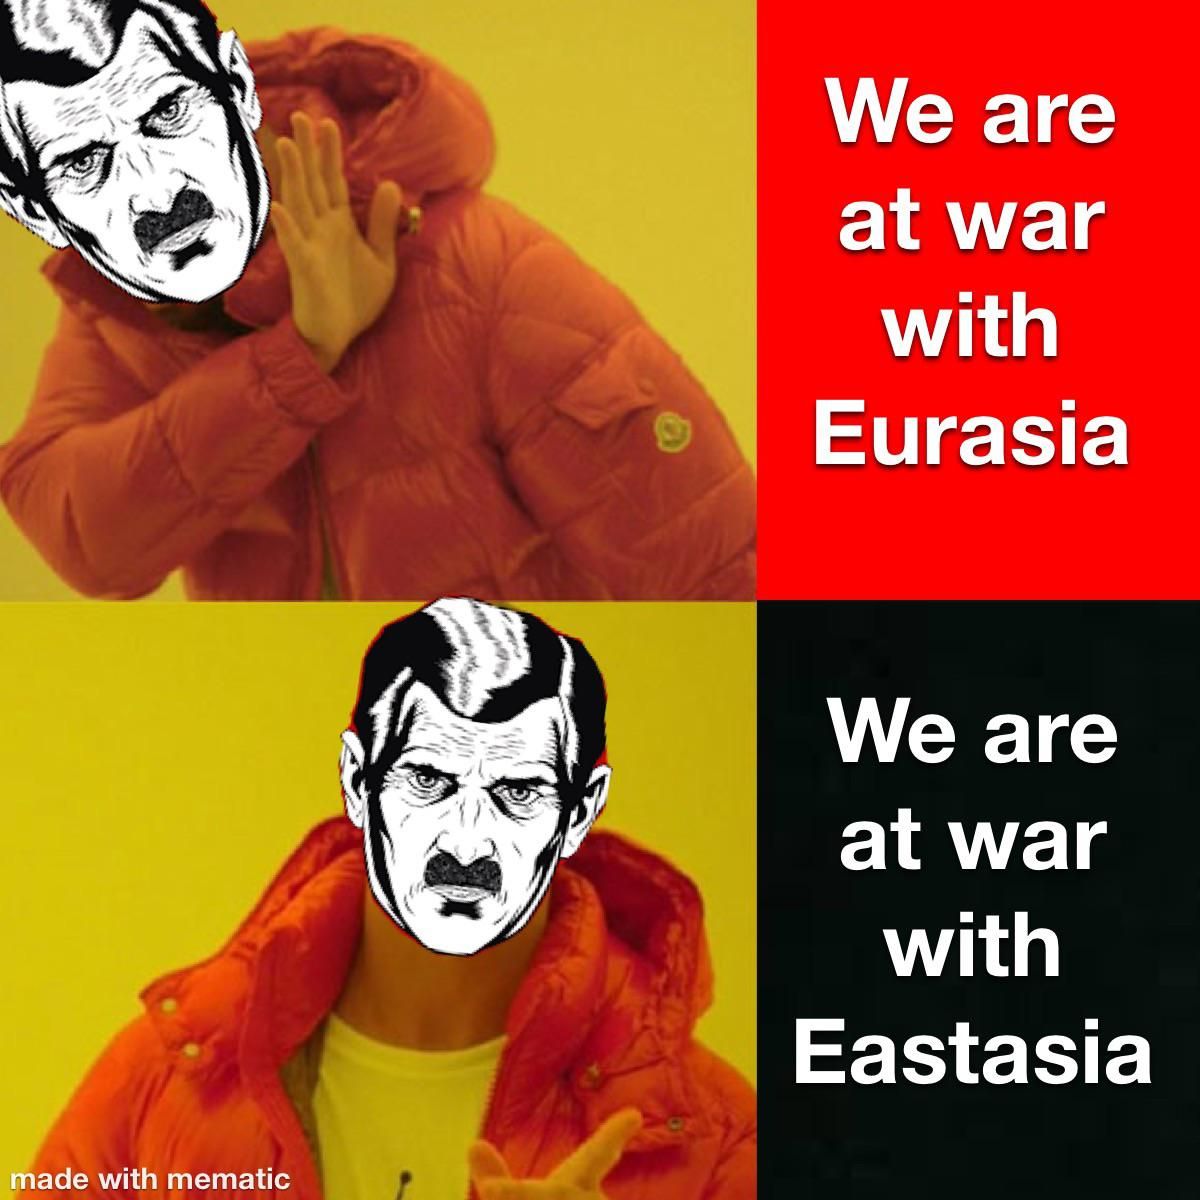 Eurasia is our ally and we were always at war with Eastasia